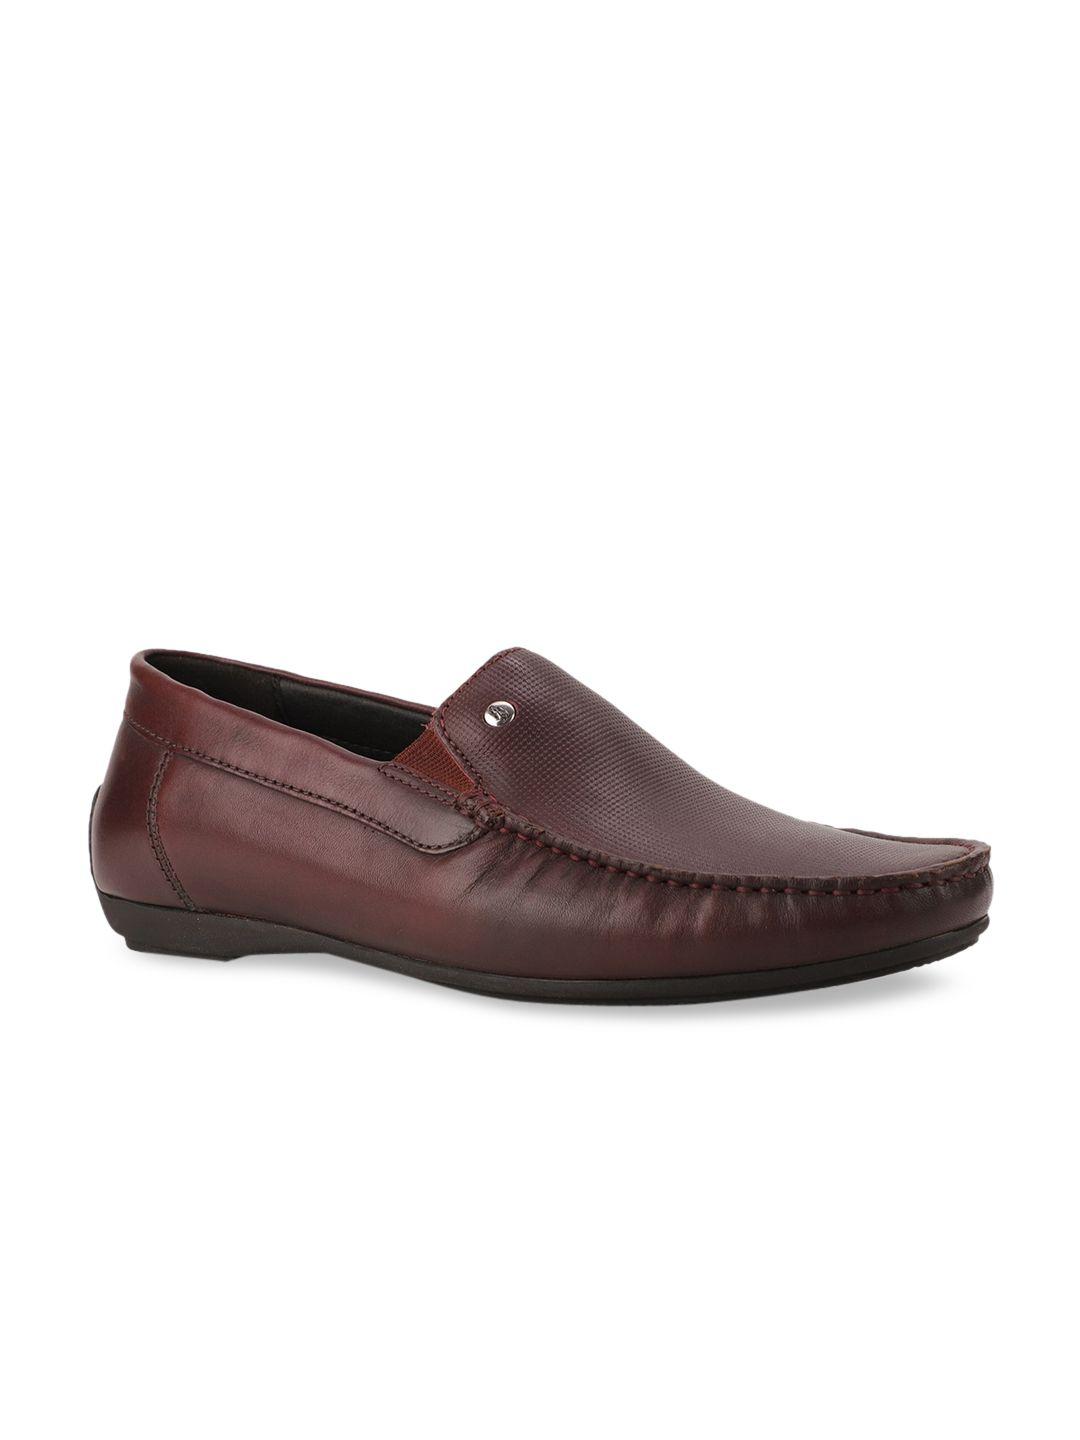 hush puppies men brown leather slip-on sneakers